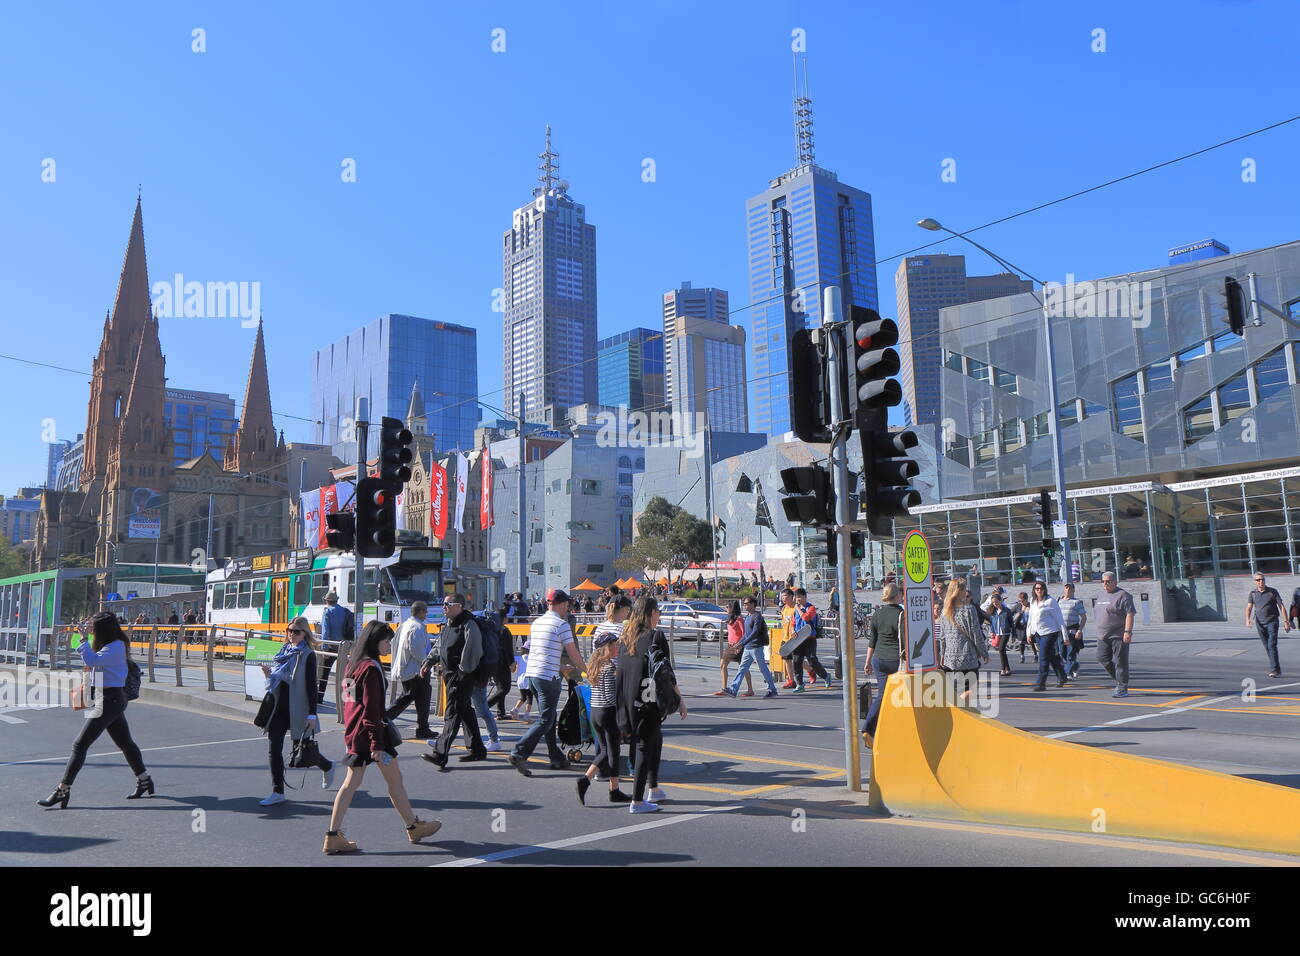 Melbourne Australia - July 7, 2017: People Cross Street In Downtown Melbourne  Australia. Stock Photo, Picture and Royalty Free Image. Image 82216965.